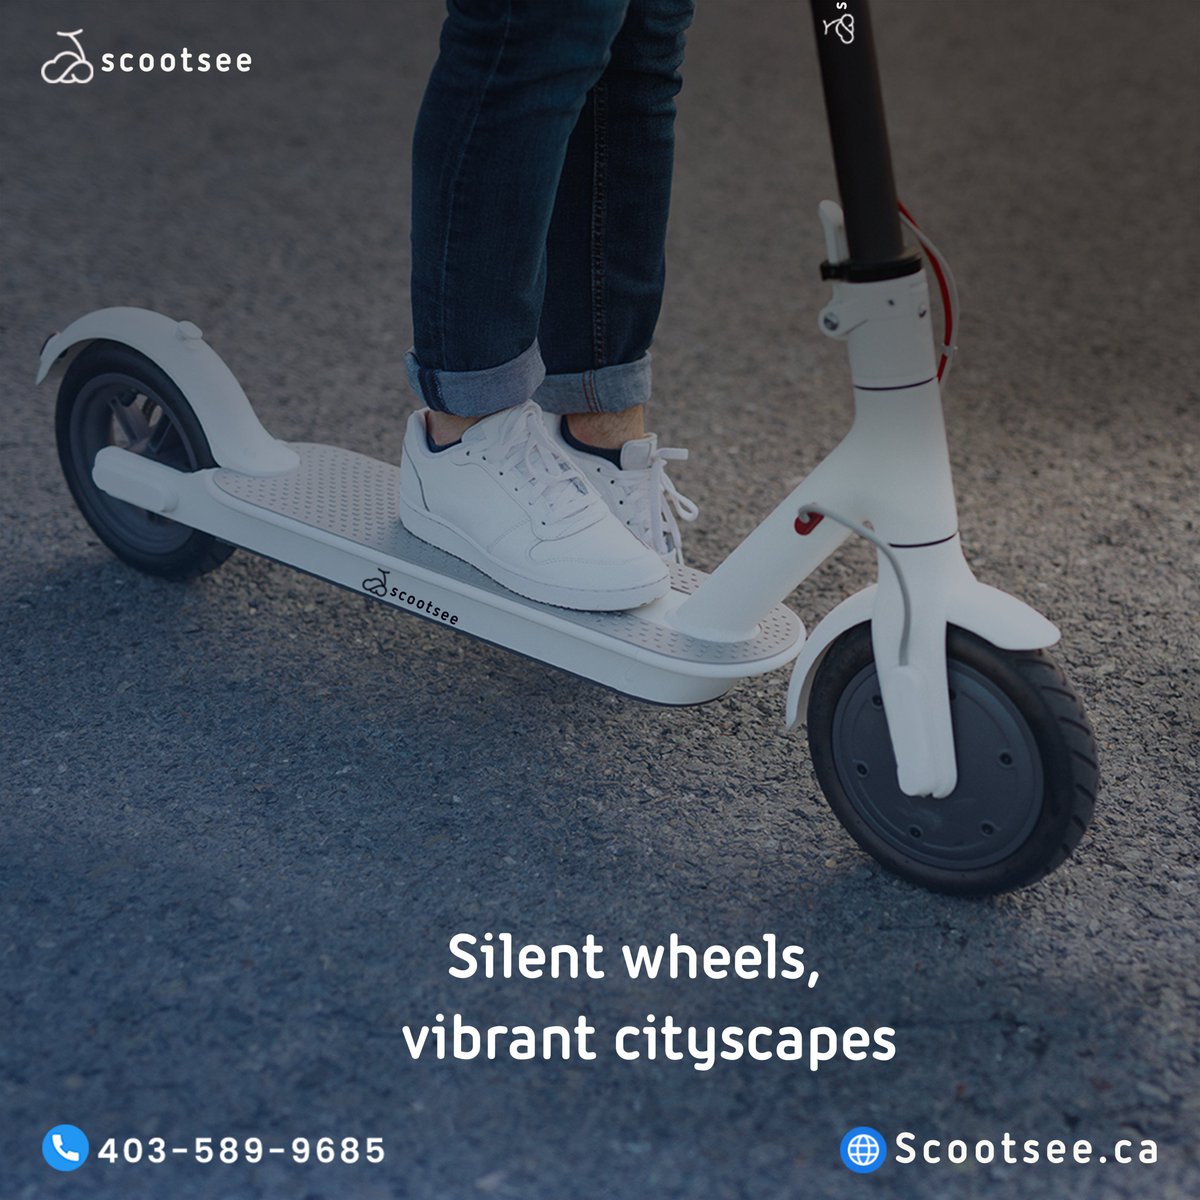 Cruising through life on my electric scooter.
#ecoadventures #scootsee #canada